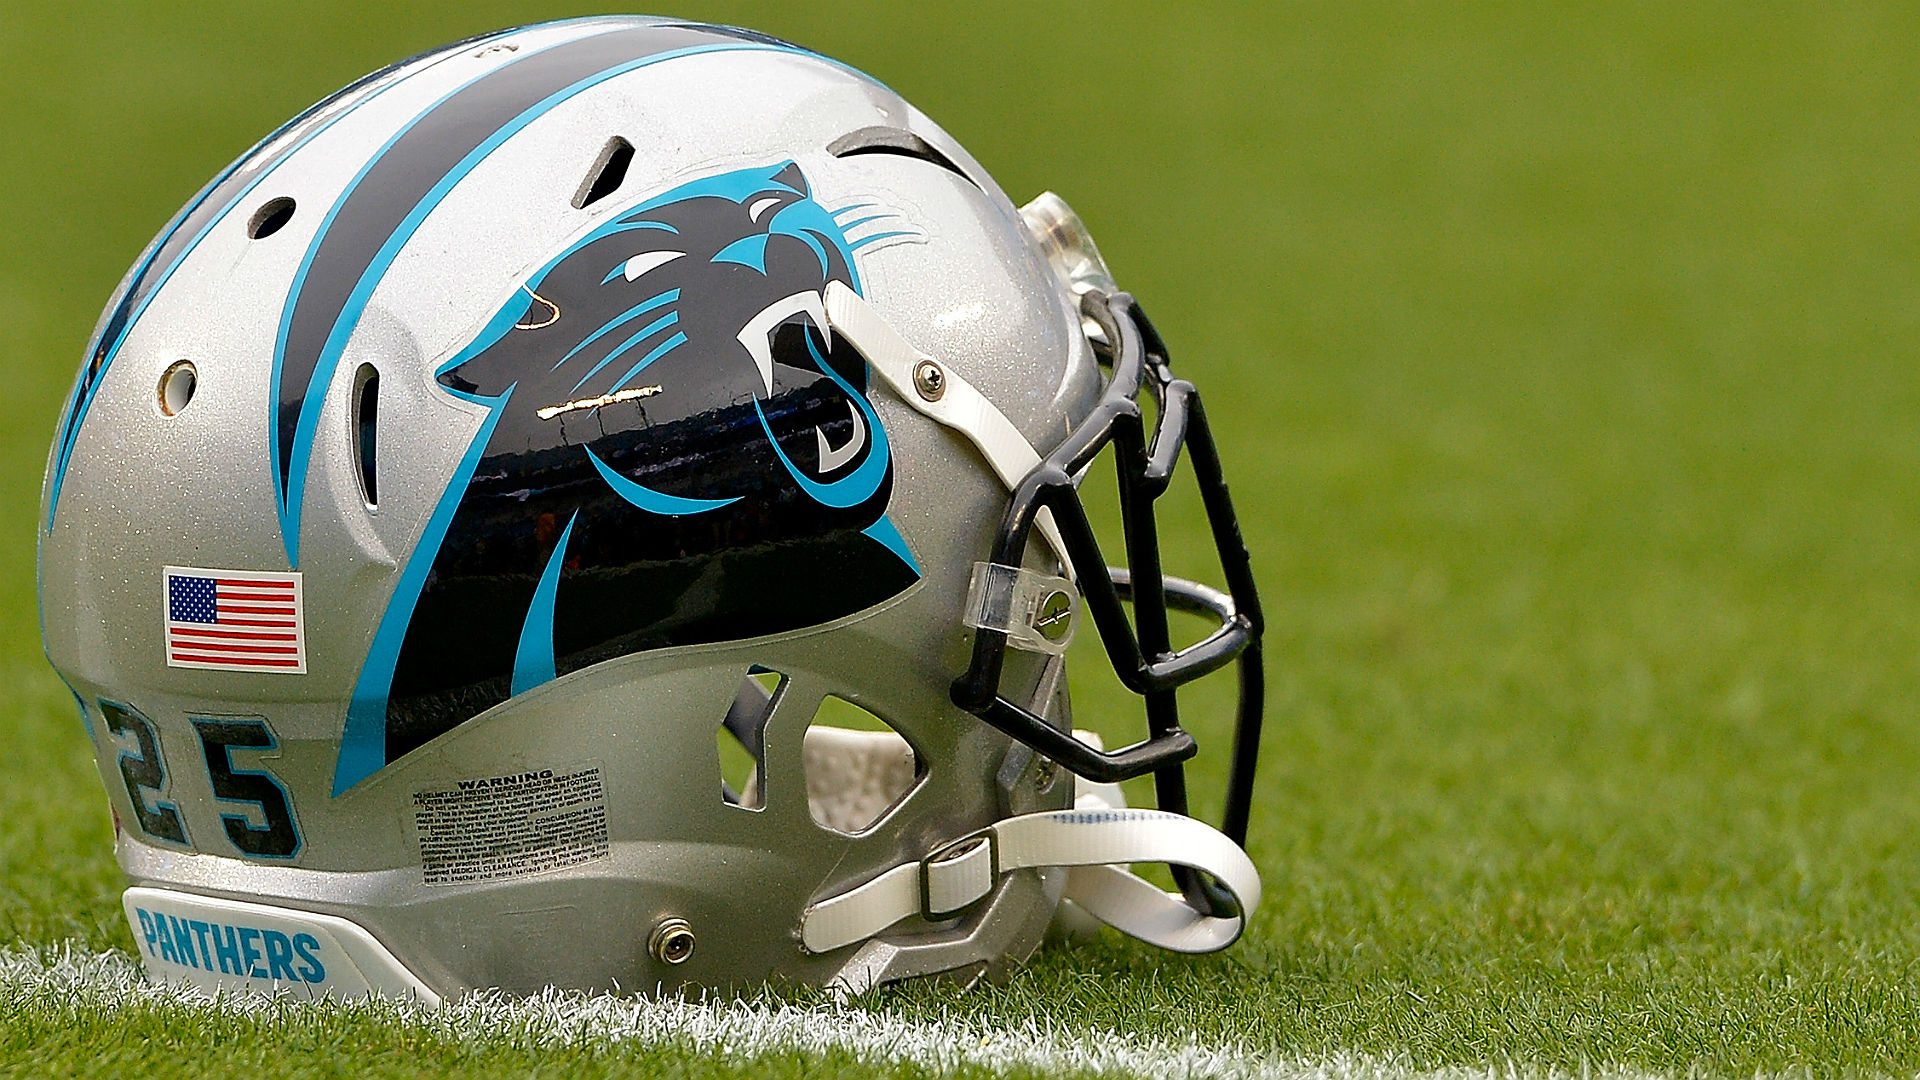 Panthers defensive end Bryan Cox Jr. cited for marijuana possession, other charges